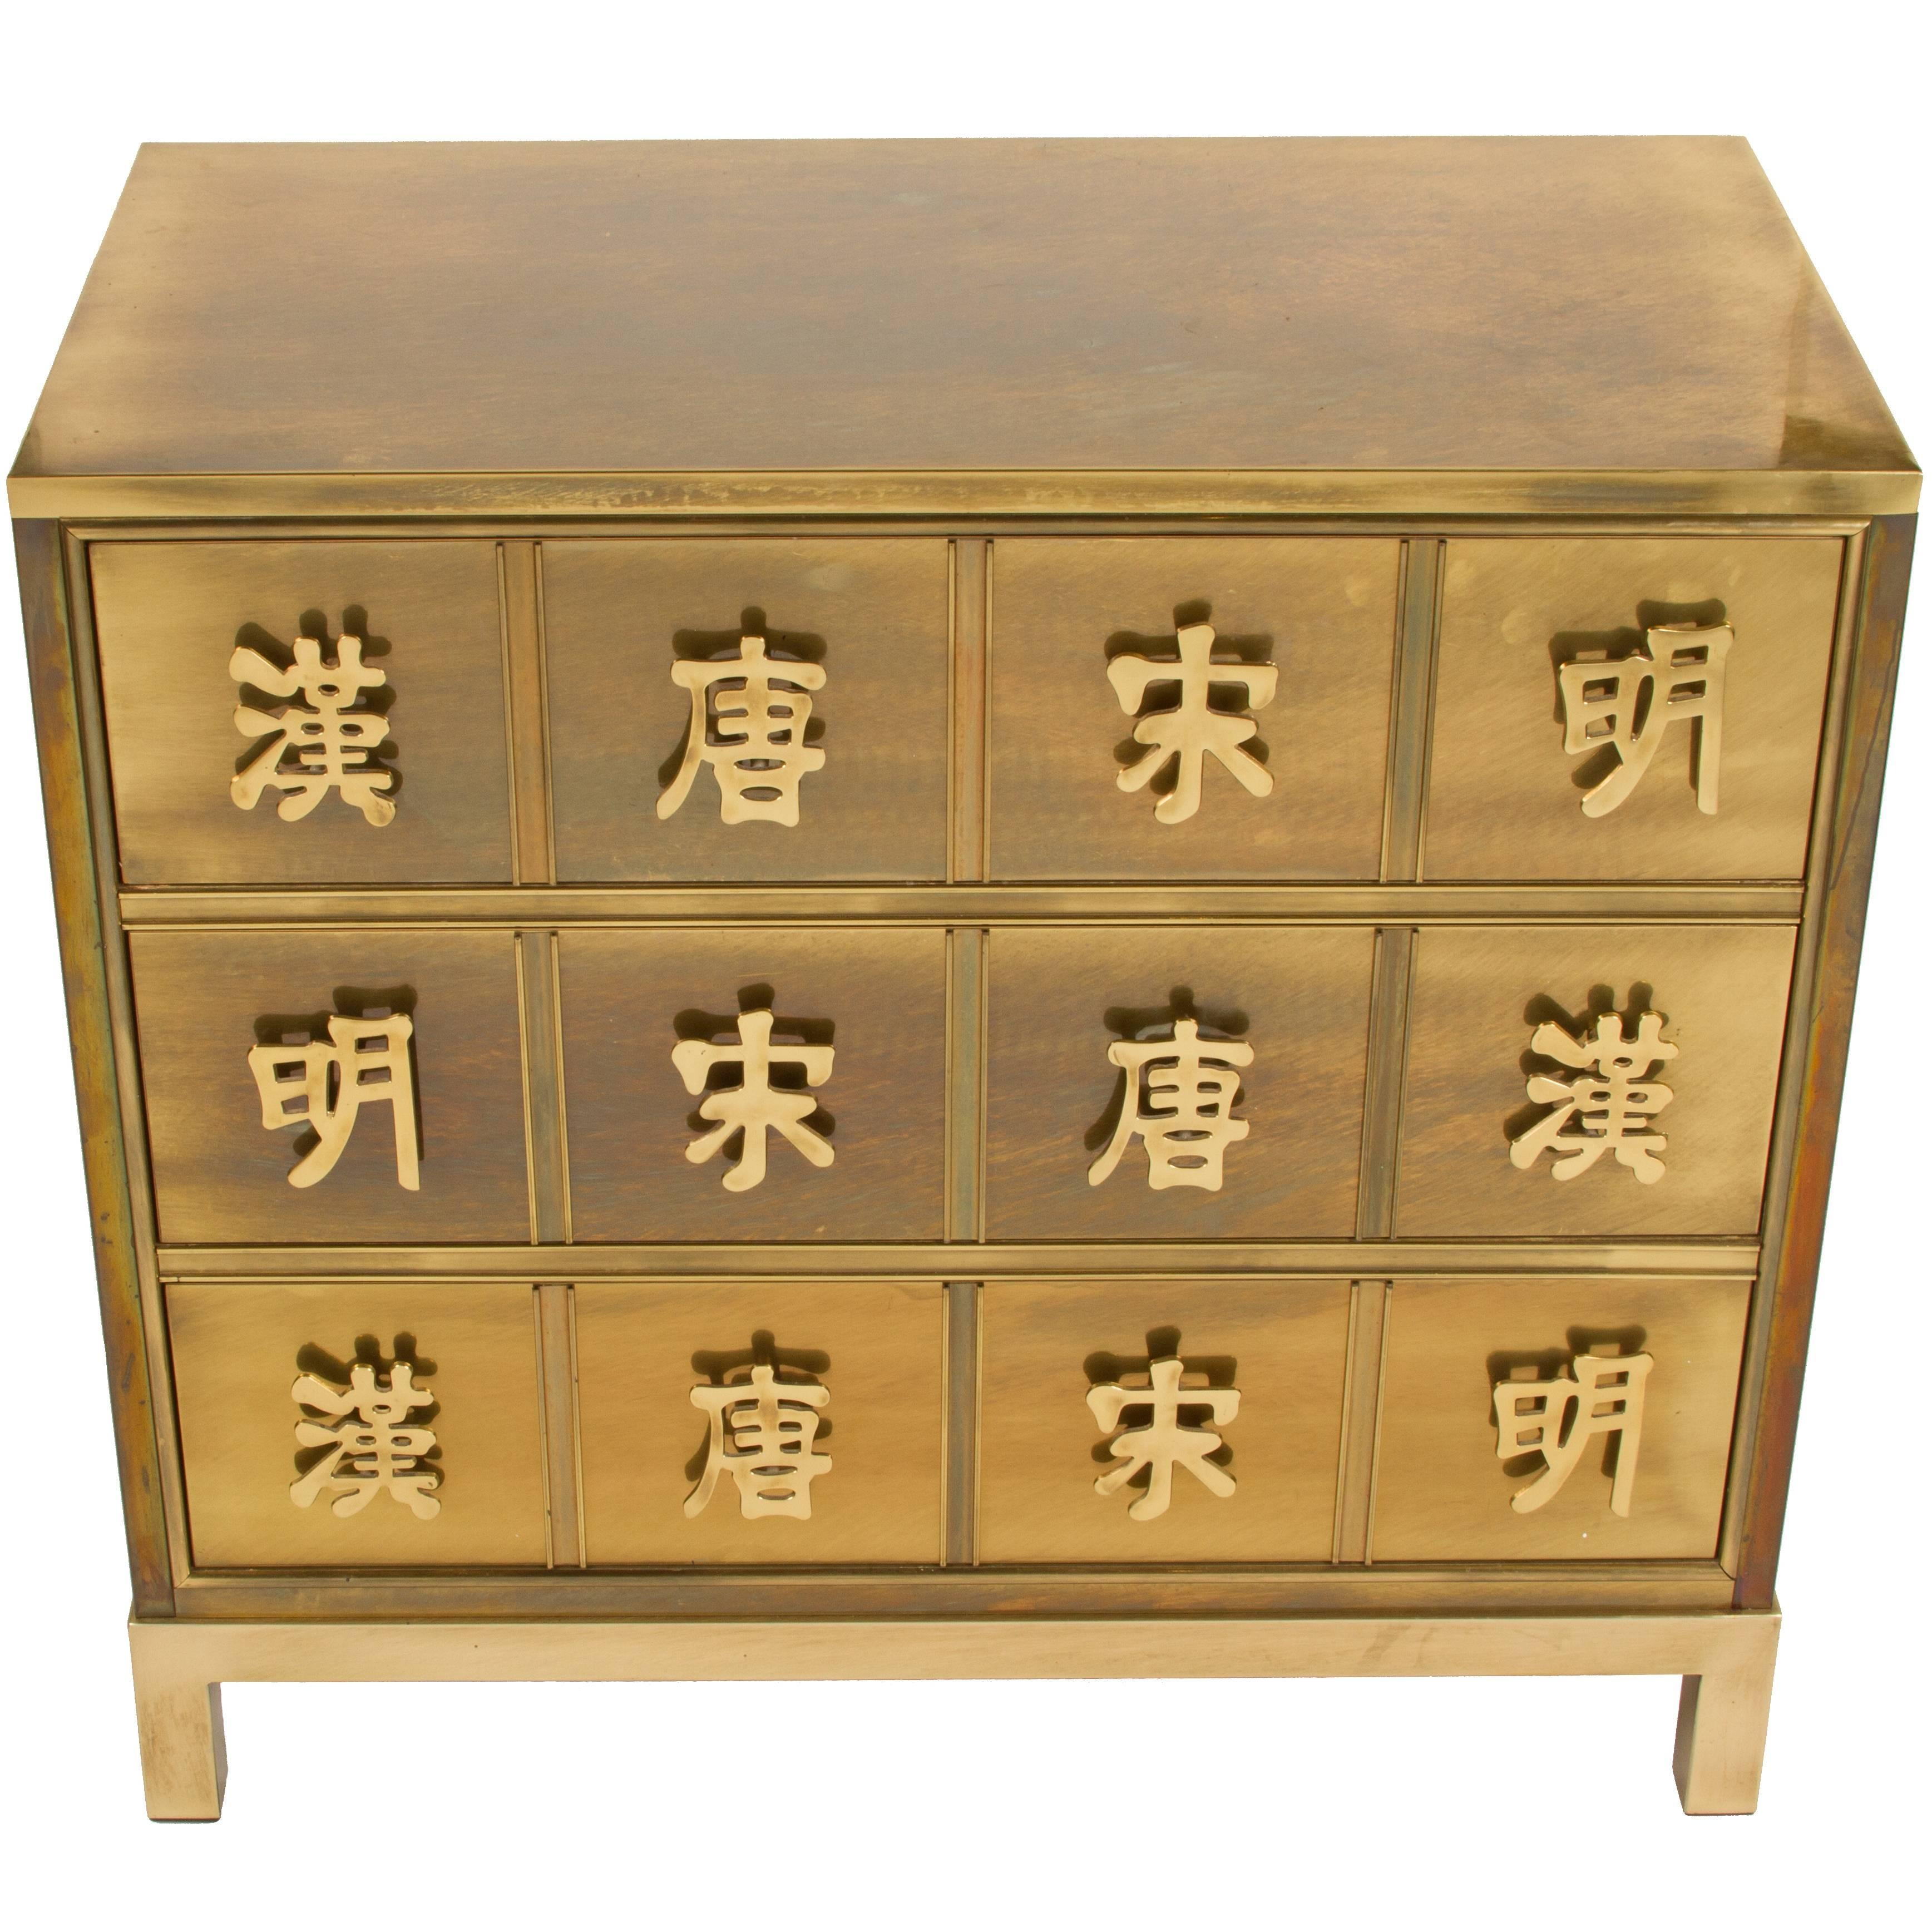 Mastercraft Chest with Chinese Characters